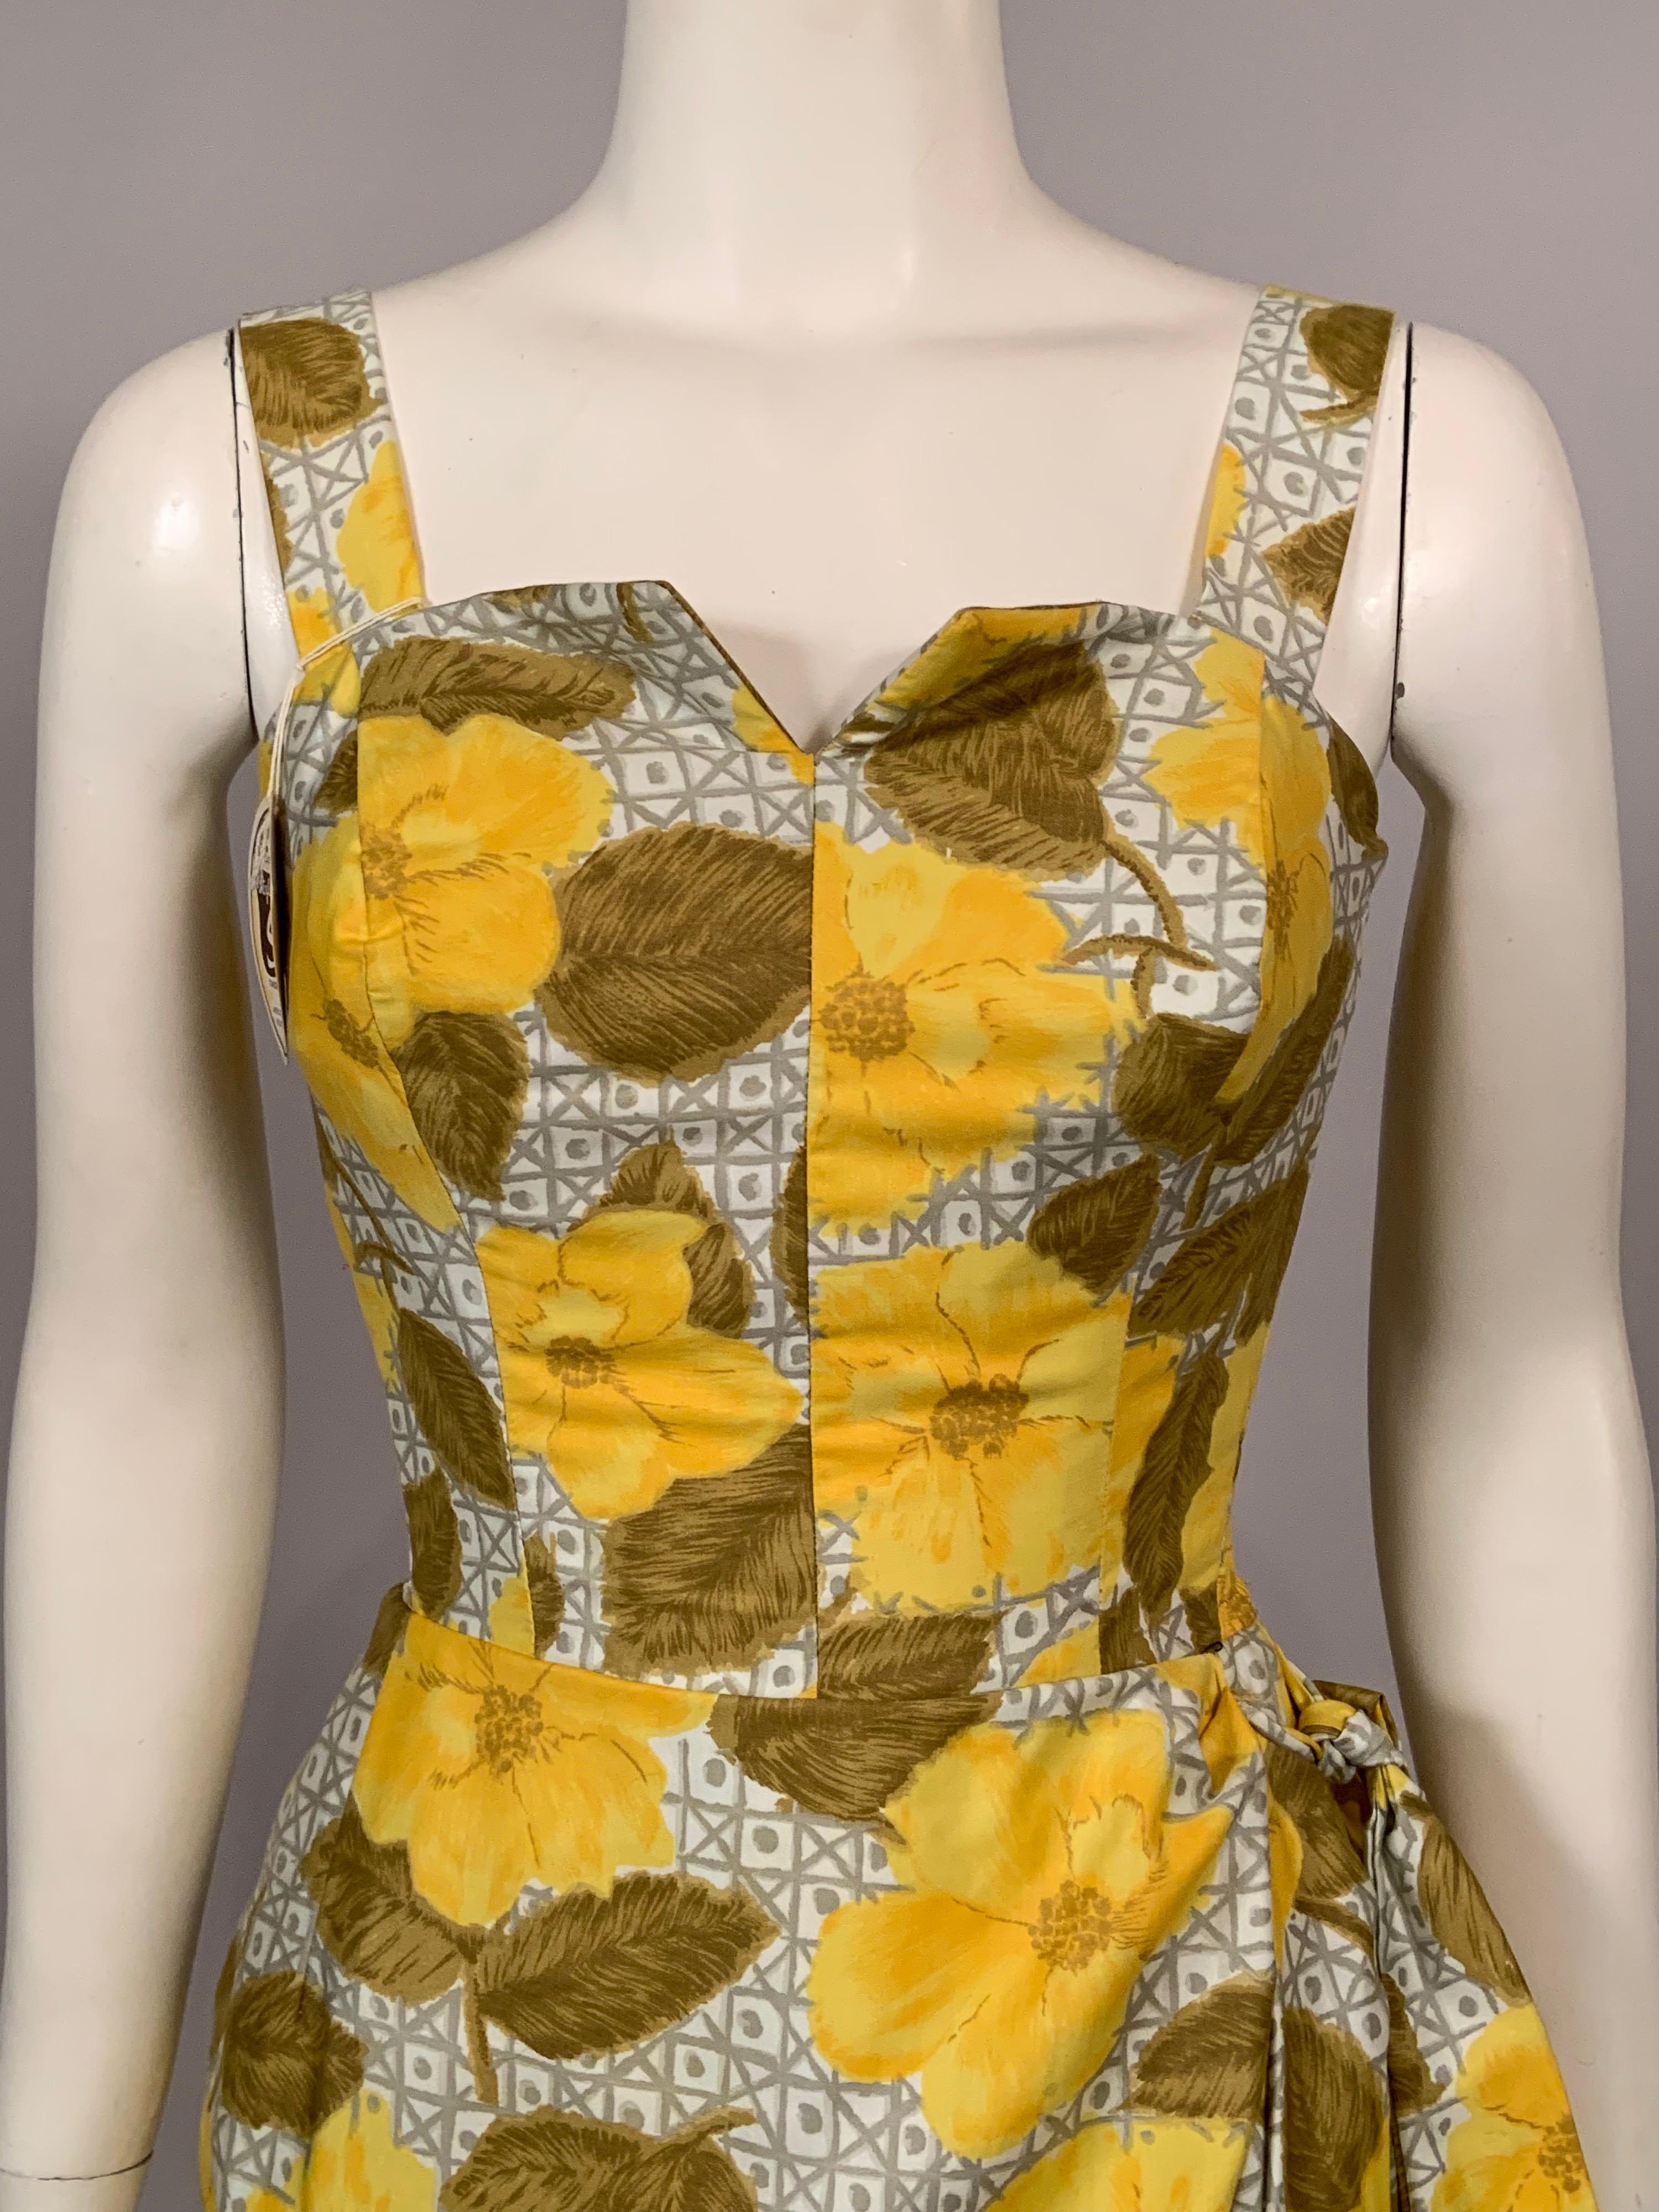 A cheerful yellow flower print on a grey and white lattice print background is used for this cotton beach dress from the 1950's by Modi of Miami. The dress has a boned bodice, adjustable straps, elasticized side panels, an attached faux wrap skirt,